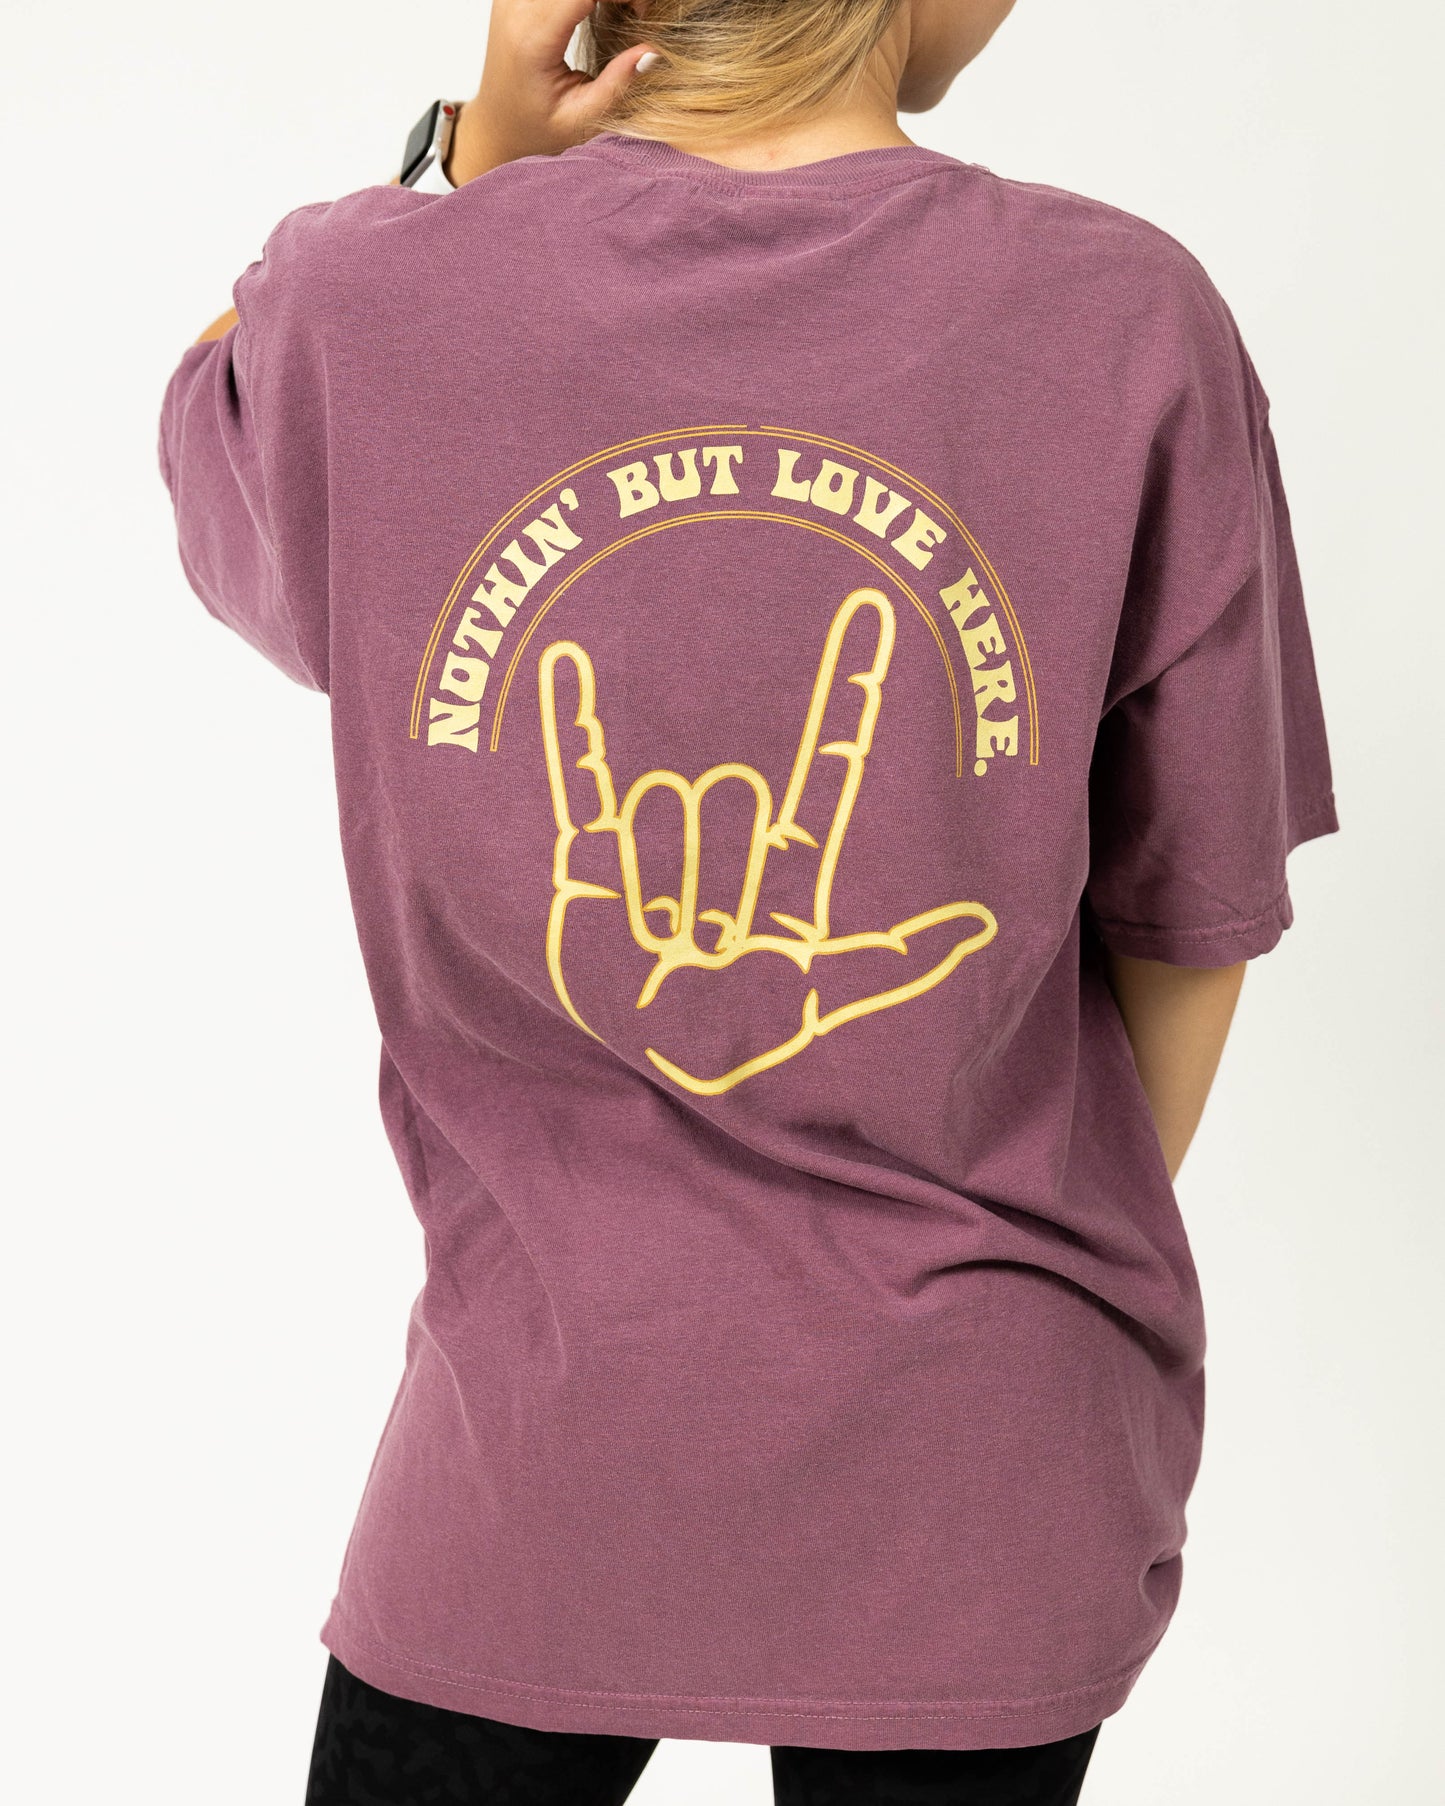 Nothin but love here tee (Multiple Colors)